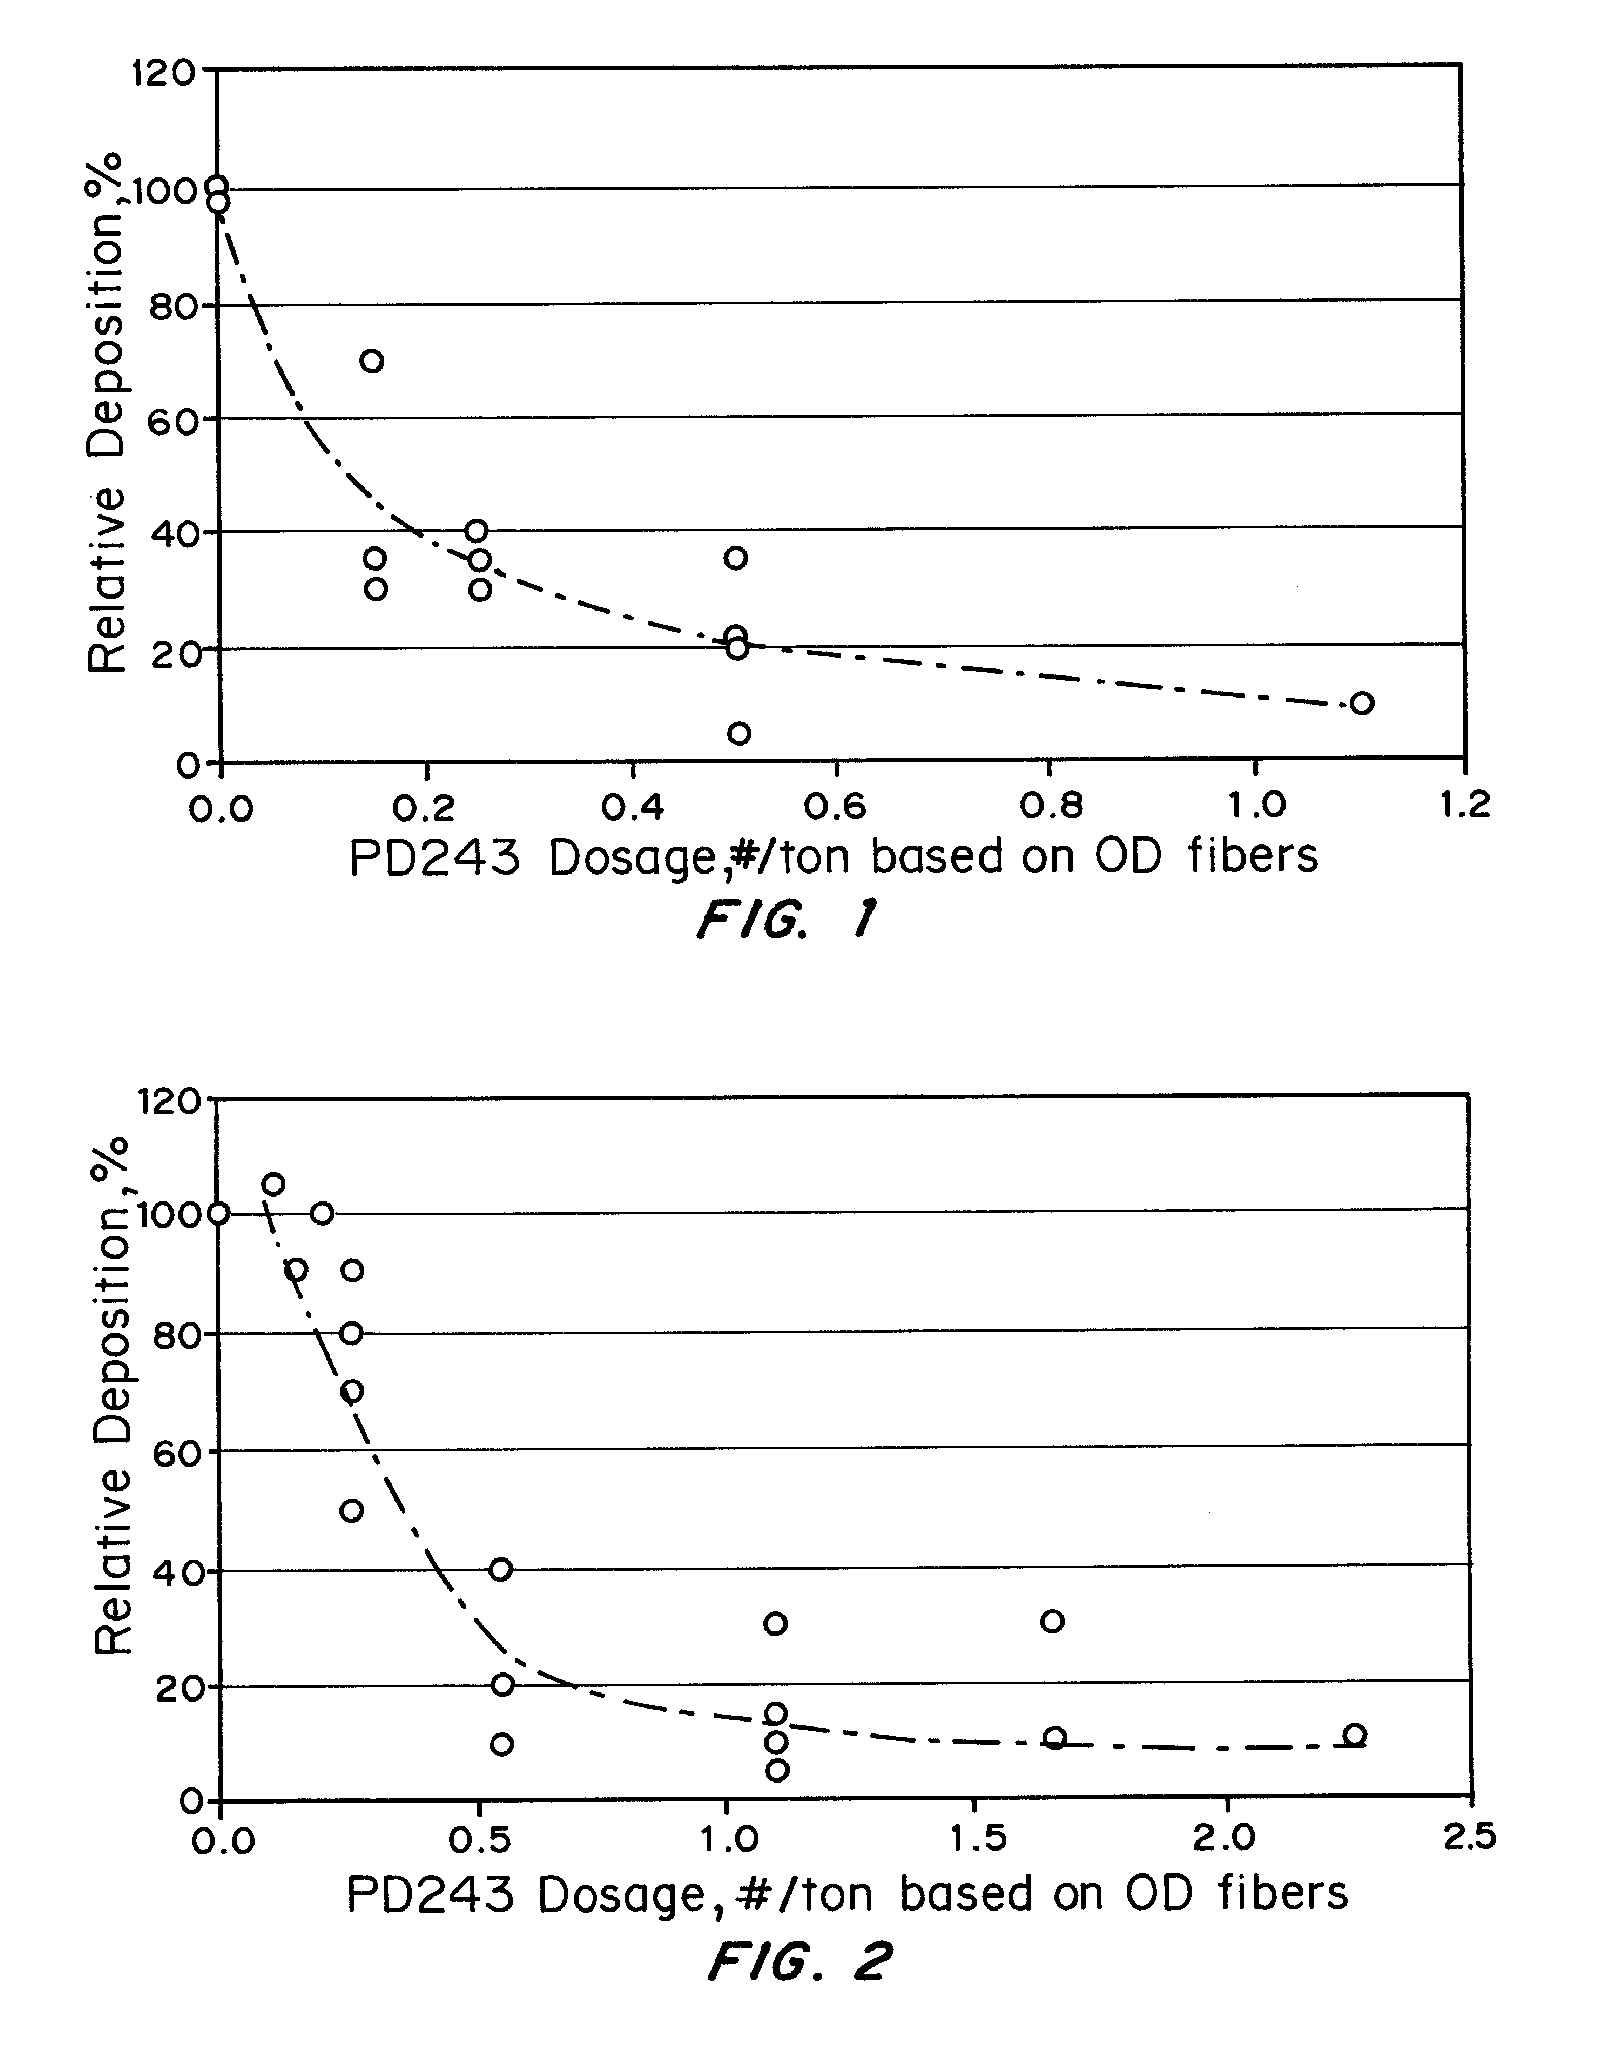 Treatment of Pulp Stocks Using Oxidative Enzymes to Reduce Pitch Deposition